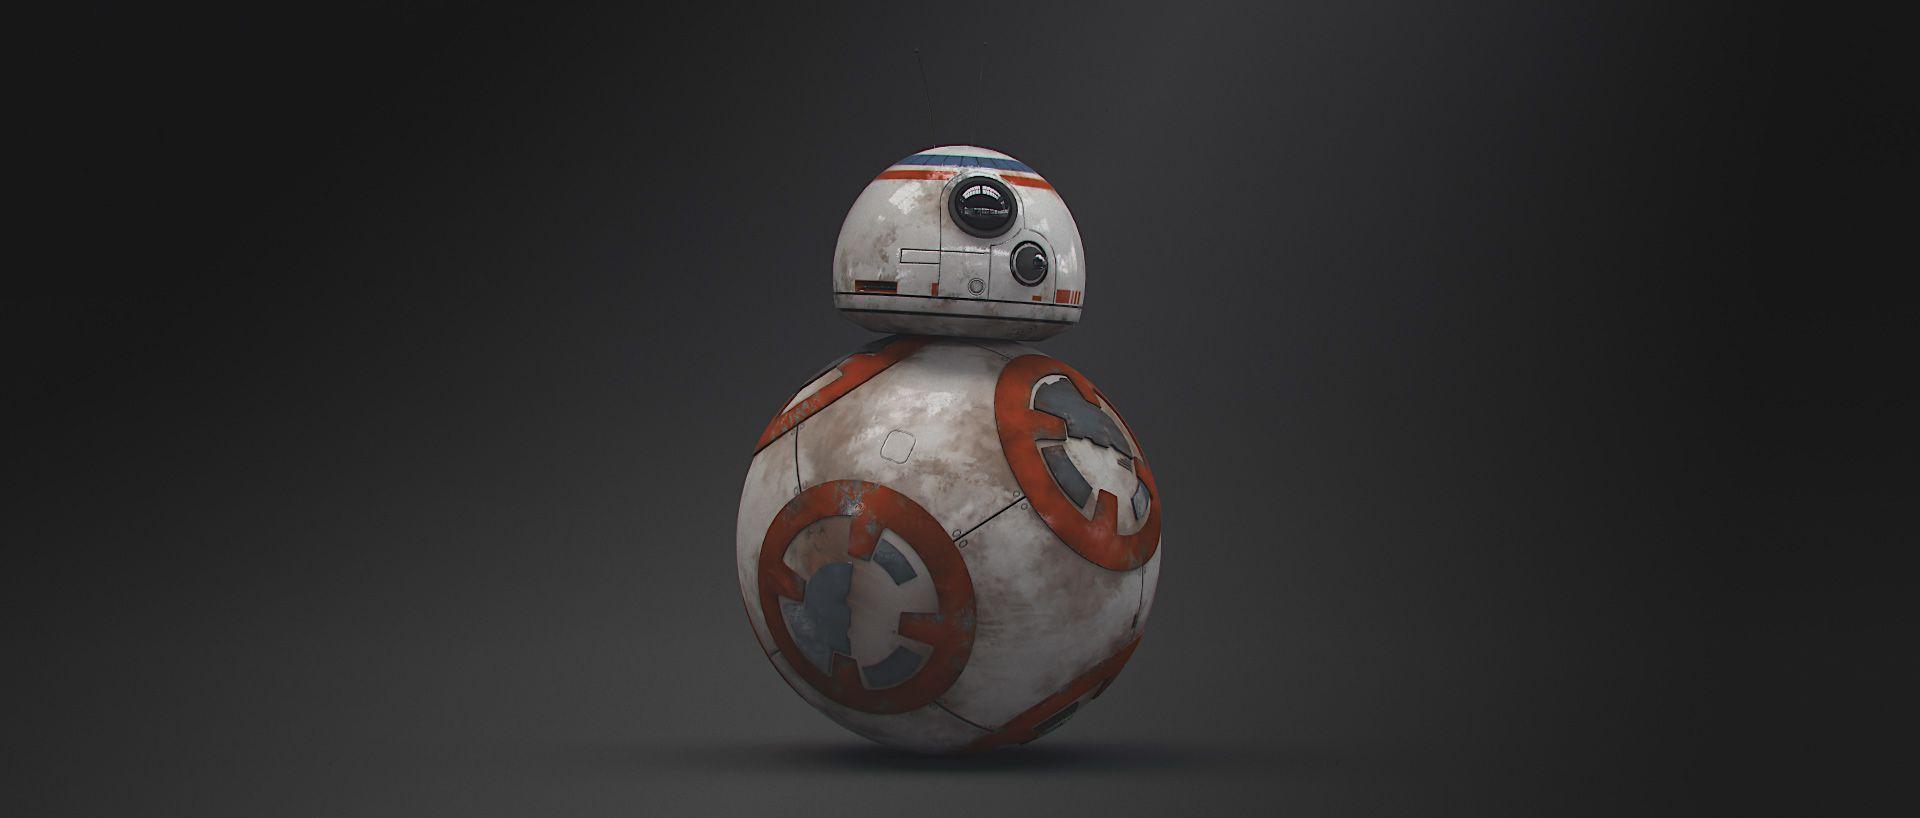 BB 8 Unit Image Wp6 HD Wallpaper And Background Photo